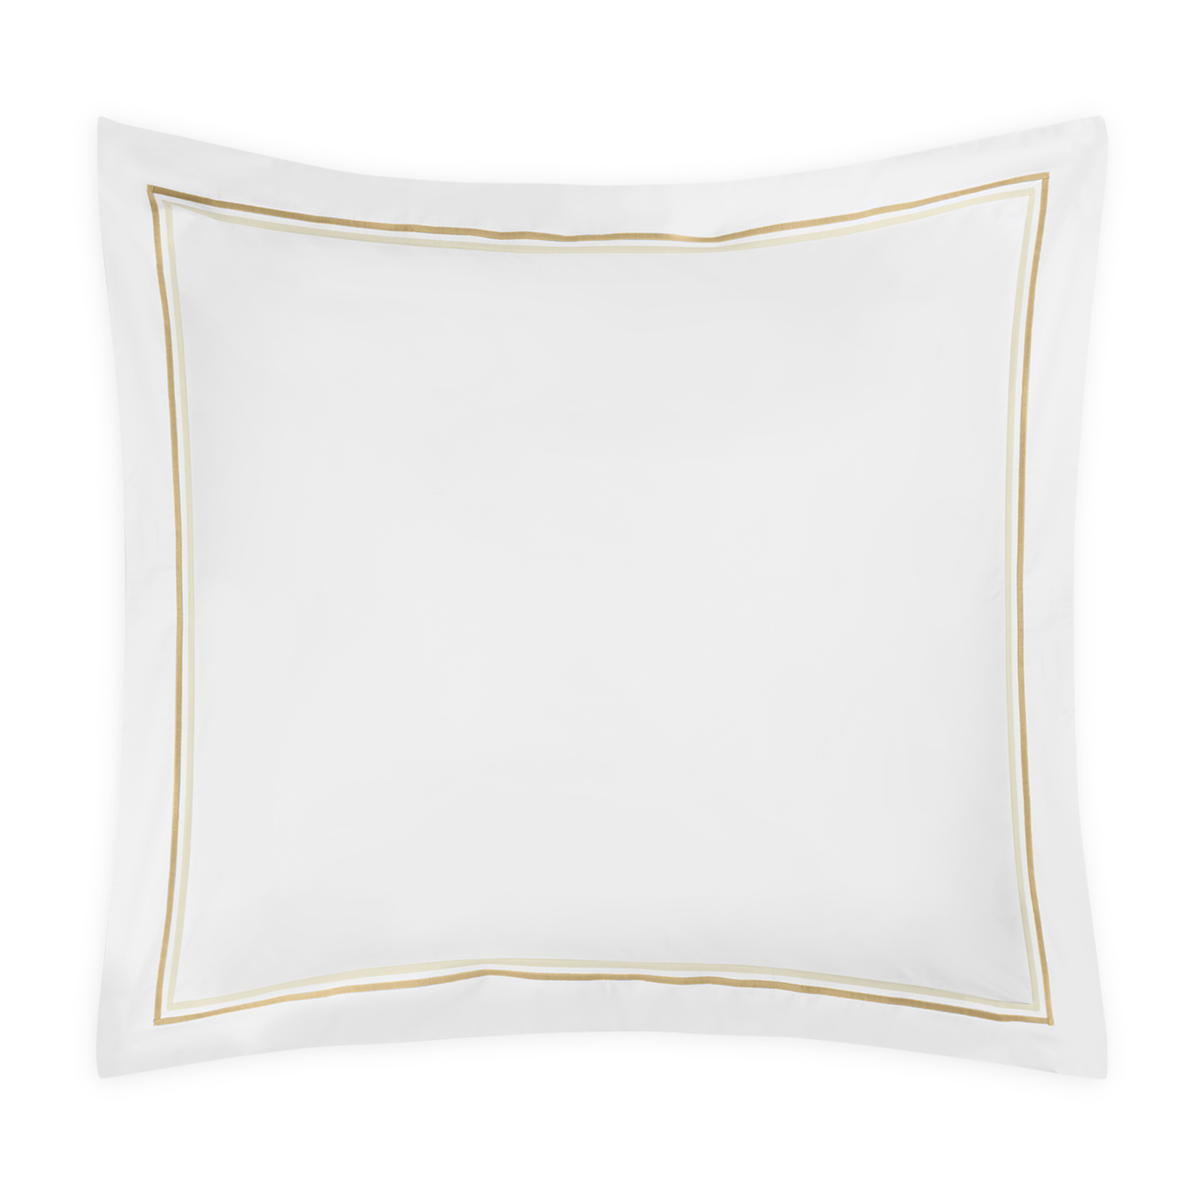 Euro Sham of Matouk Essex Bedding Collection in Champagne Color